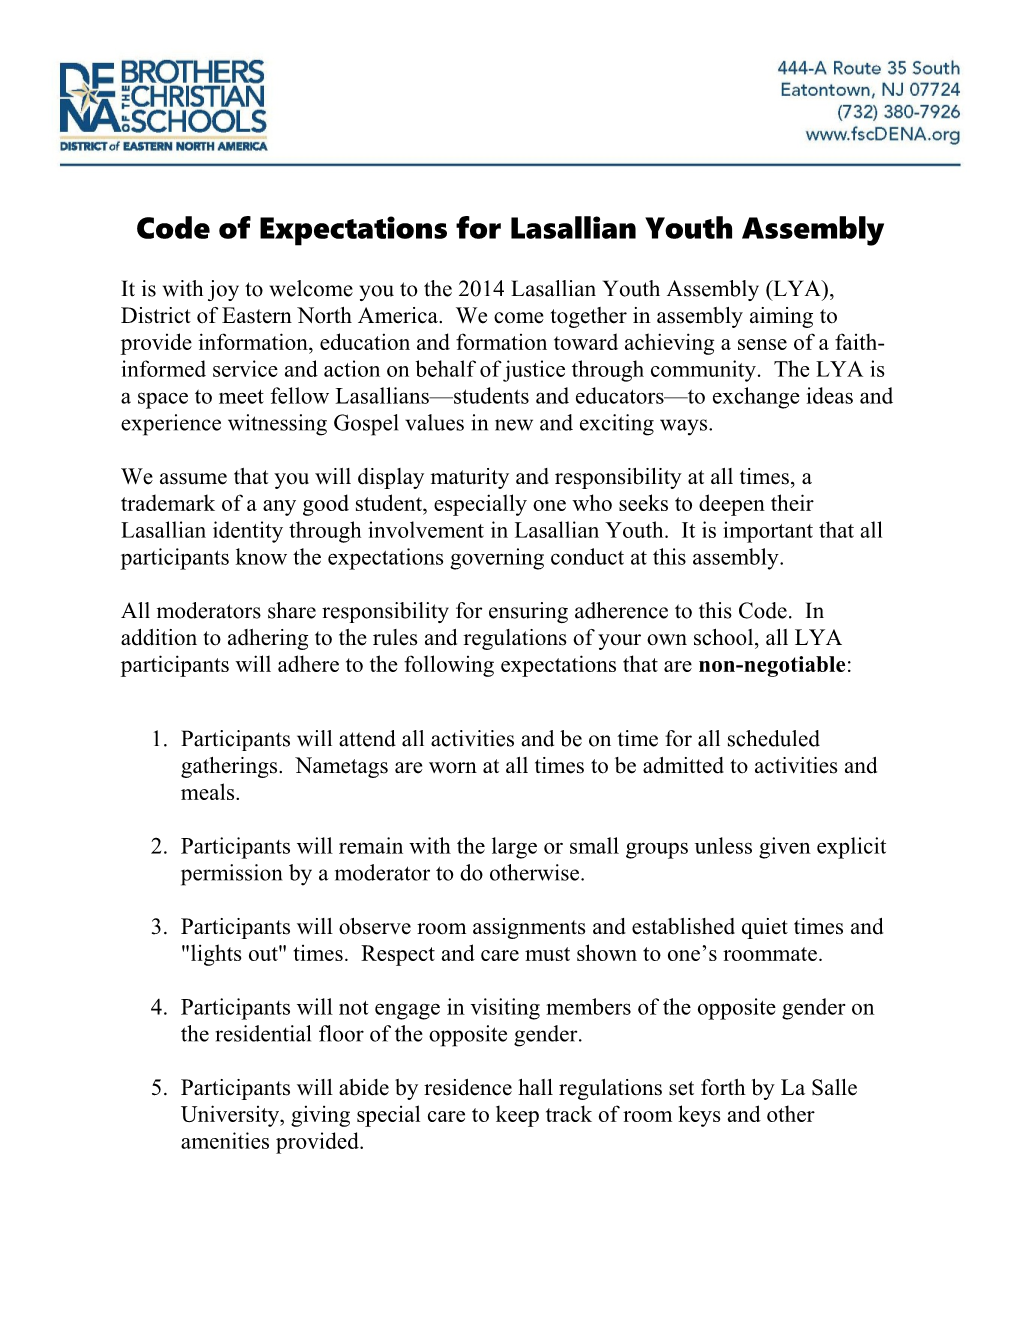 Code of Expectations for Lasallian Youth Assembly